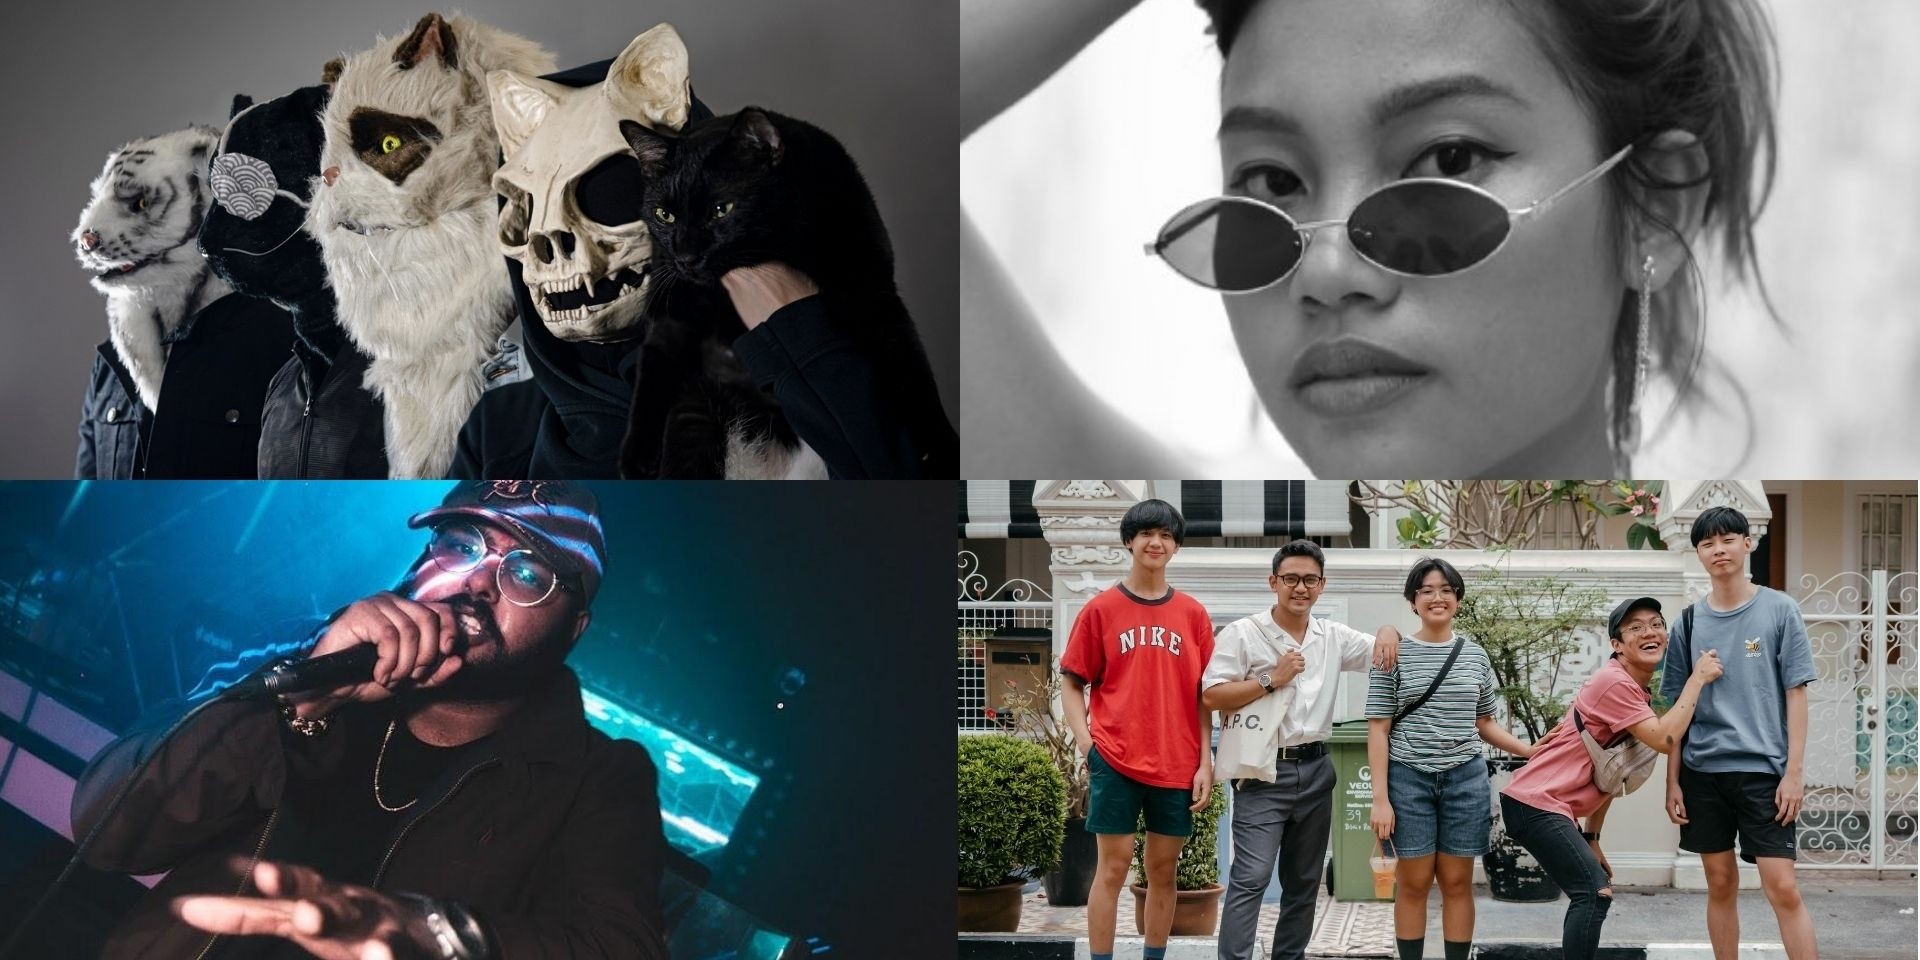 Vans Musicians Wanted Singapore announces 15 finalists including Ultra Mega Cat Attack, Opus Renegade, Khally, Woes, and more 